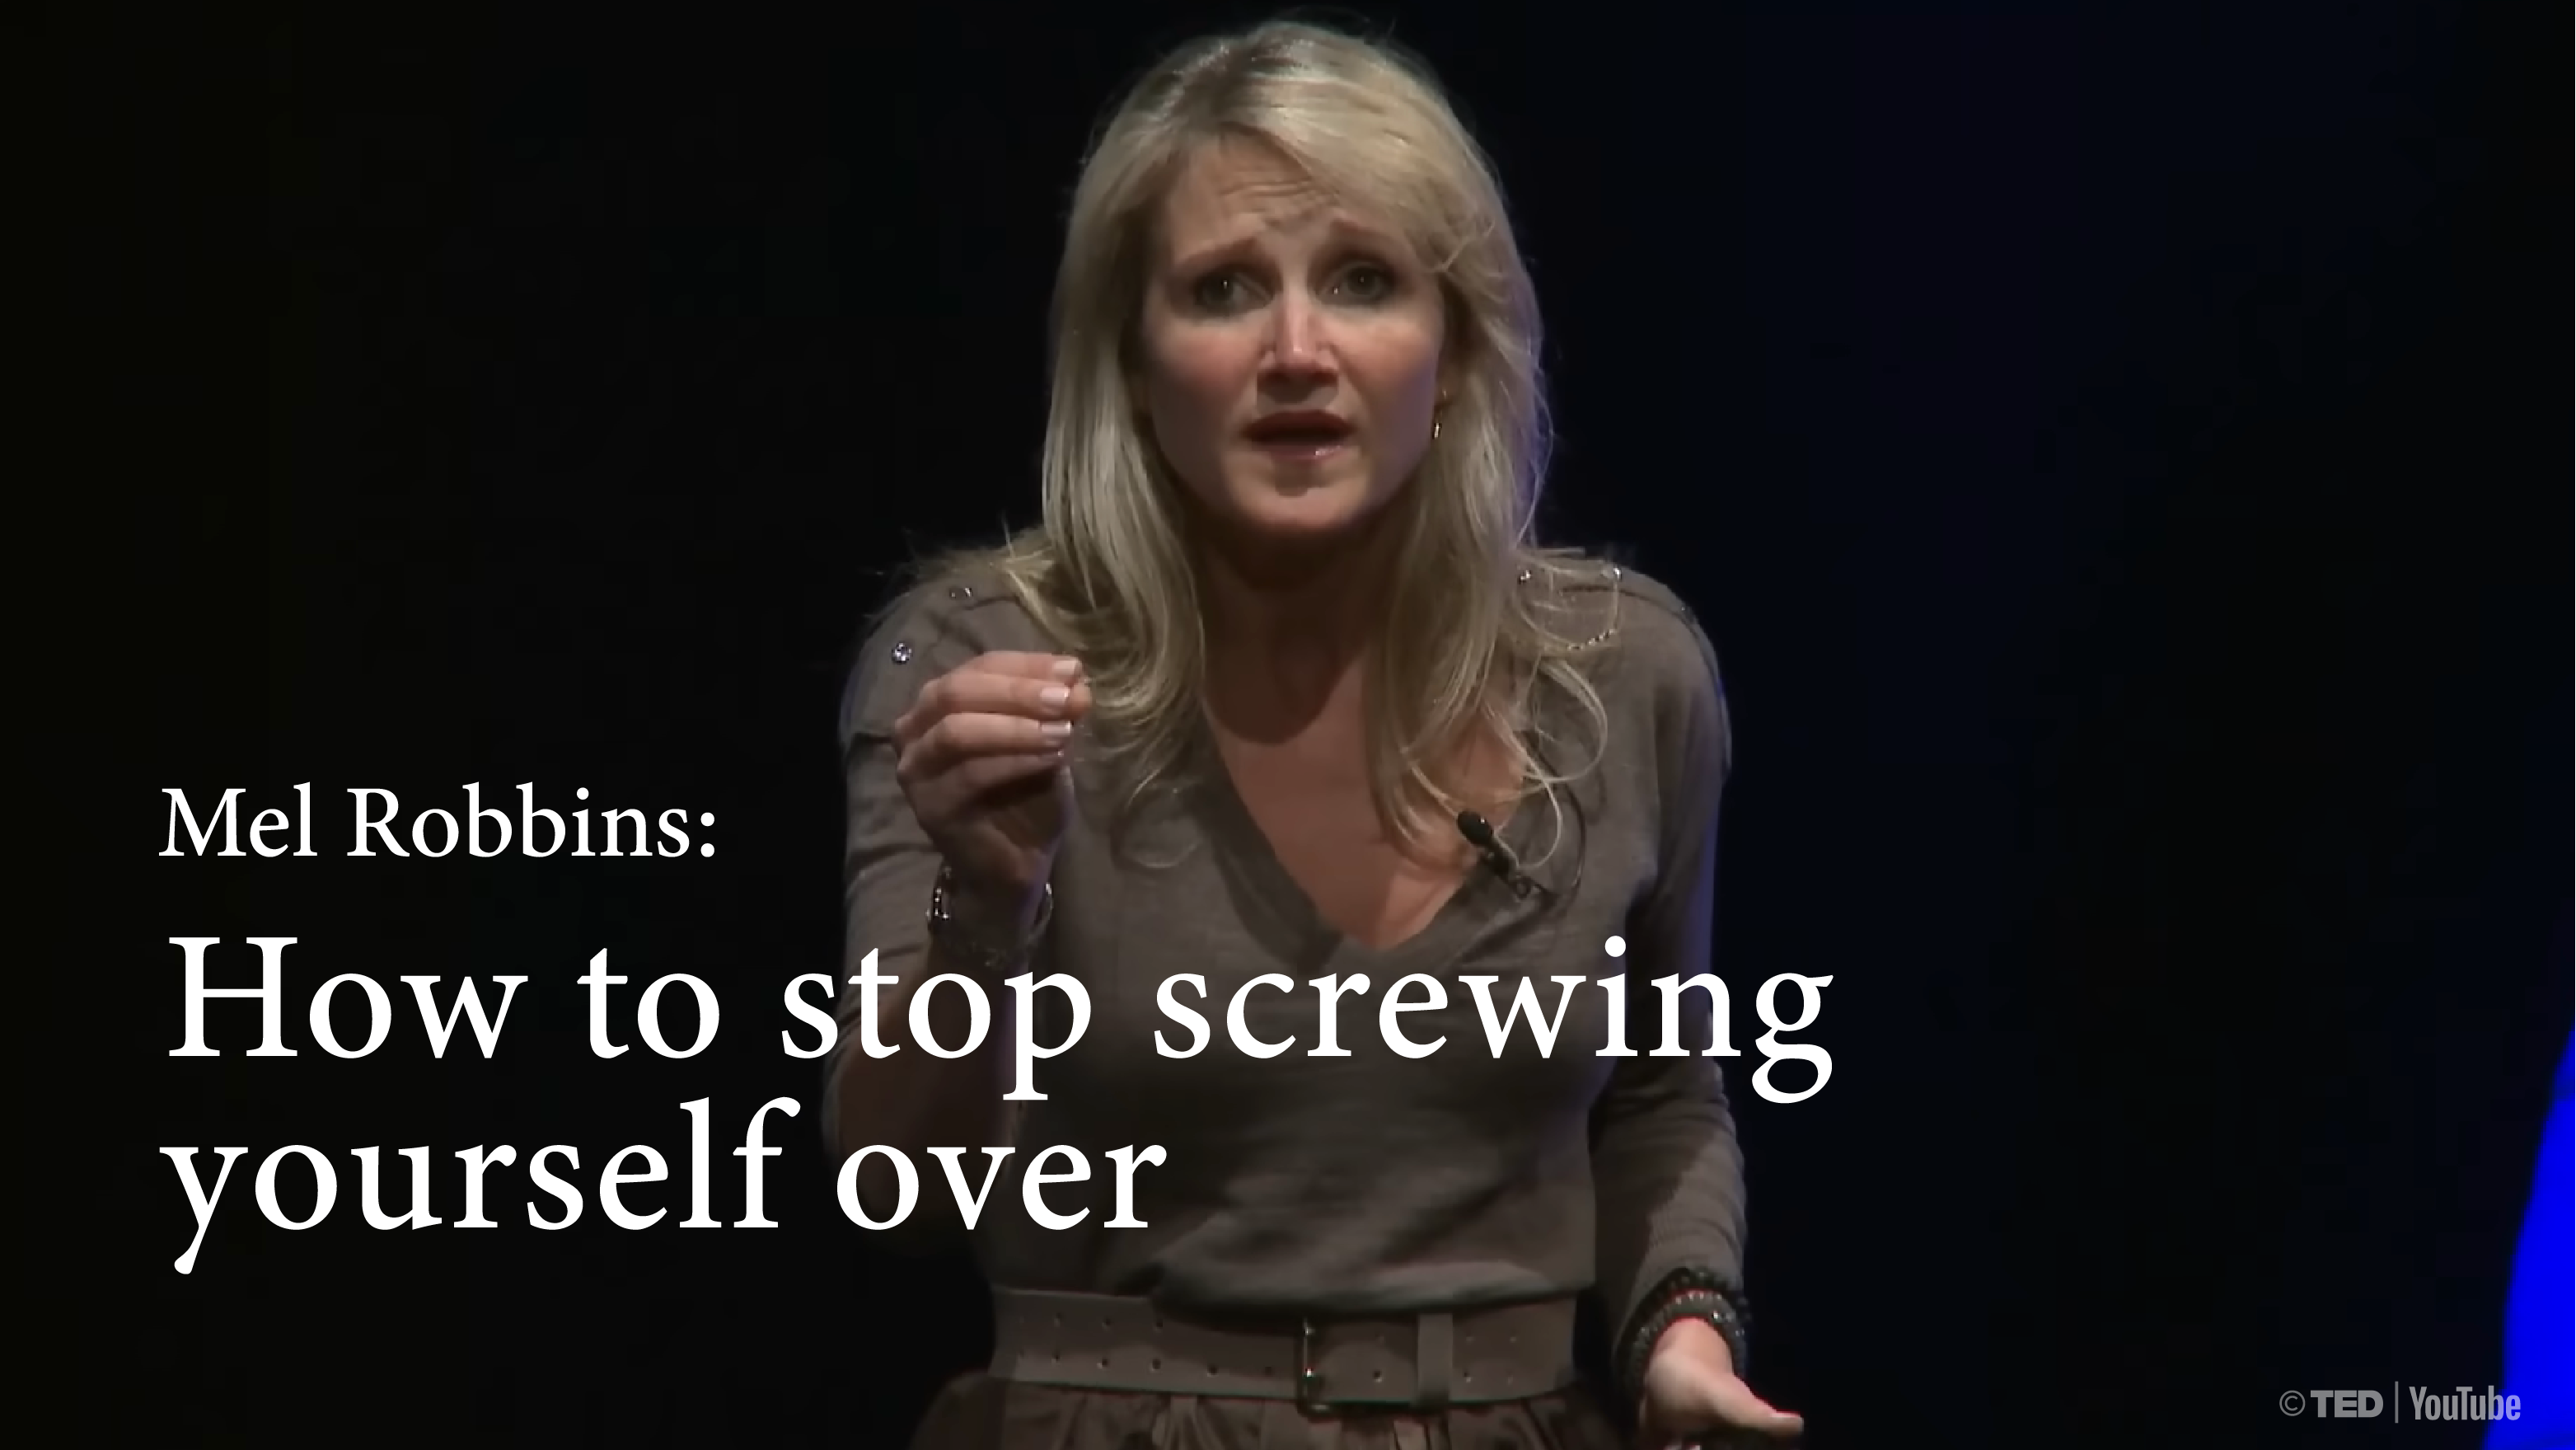 [B] How to stop screwing yourself over | Mel Robbins [FULL]